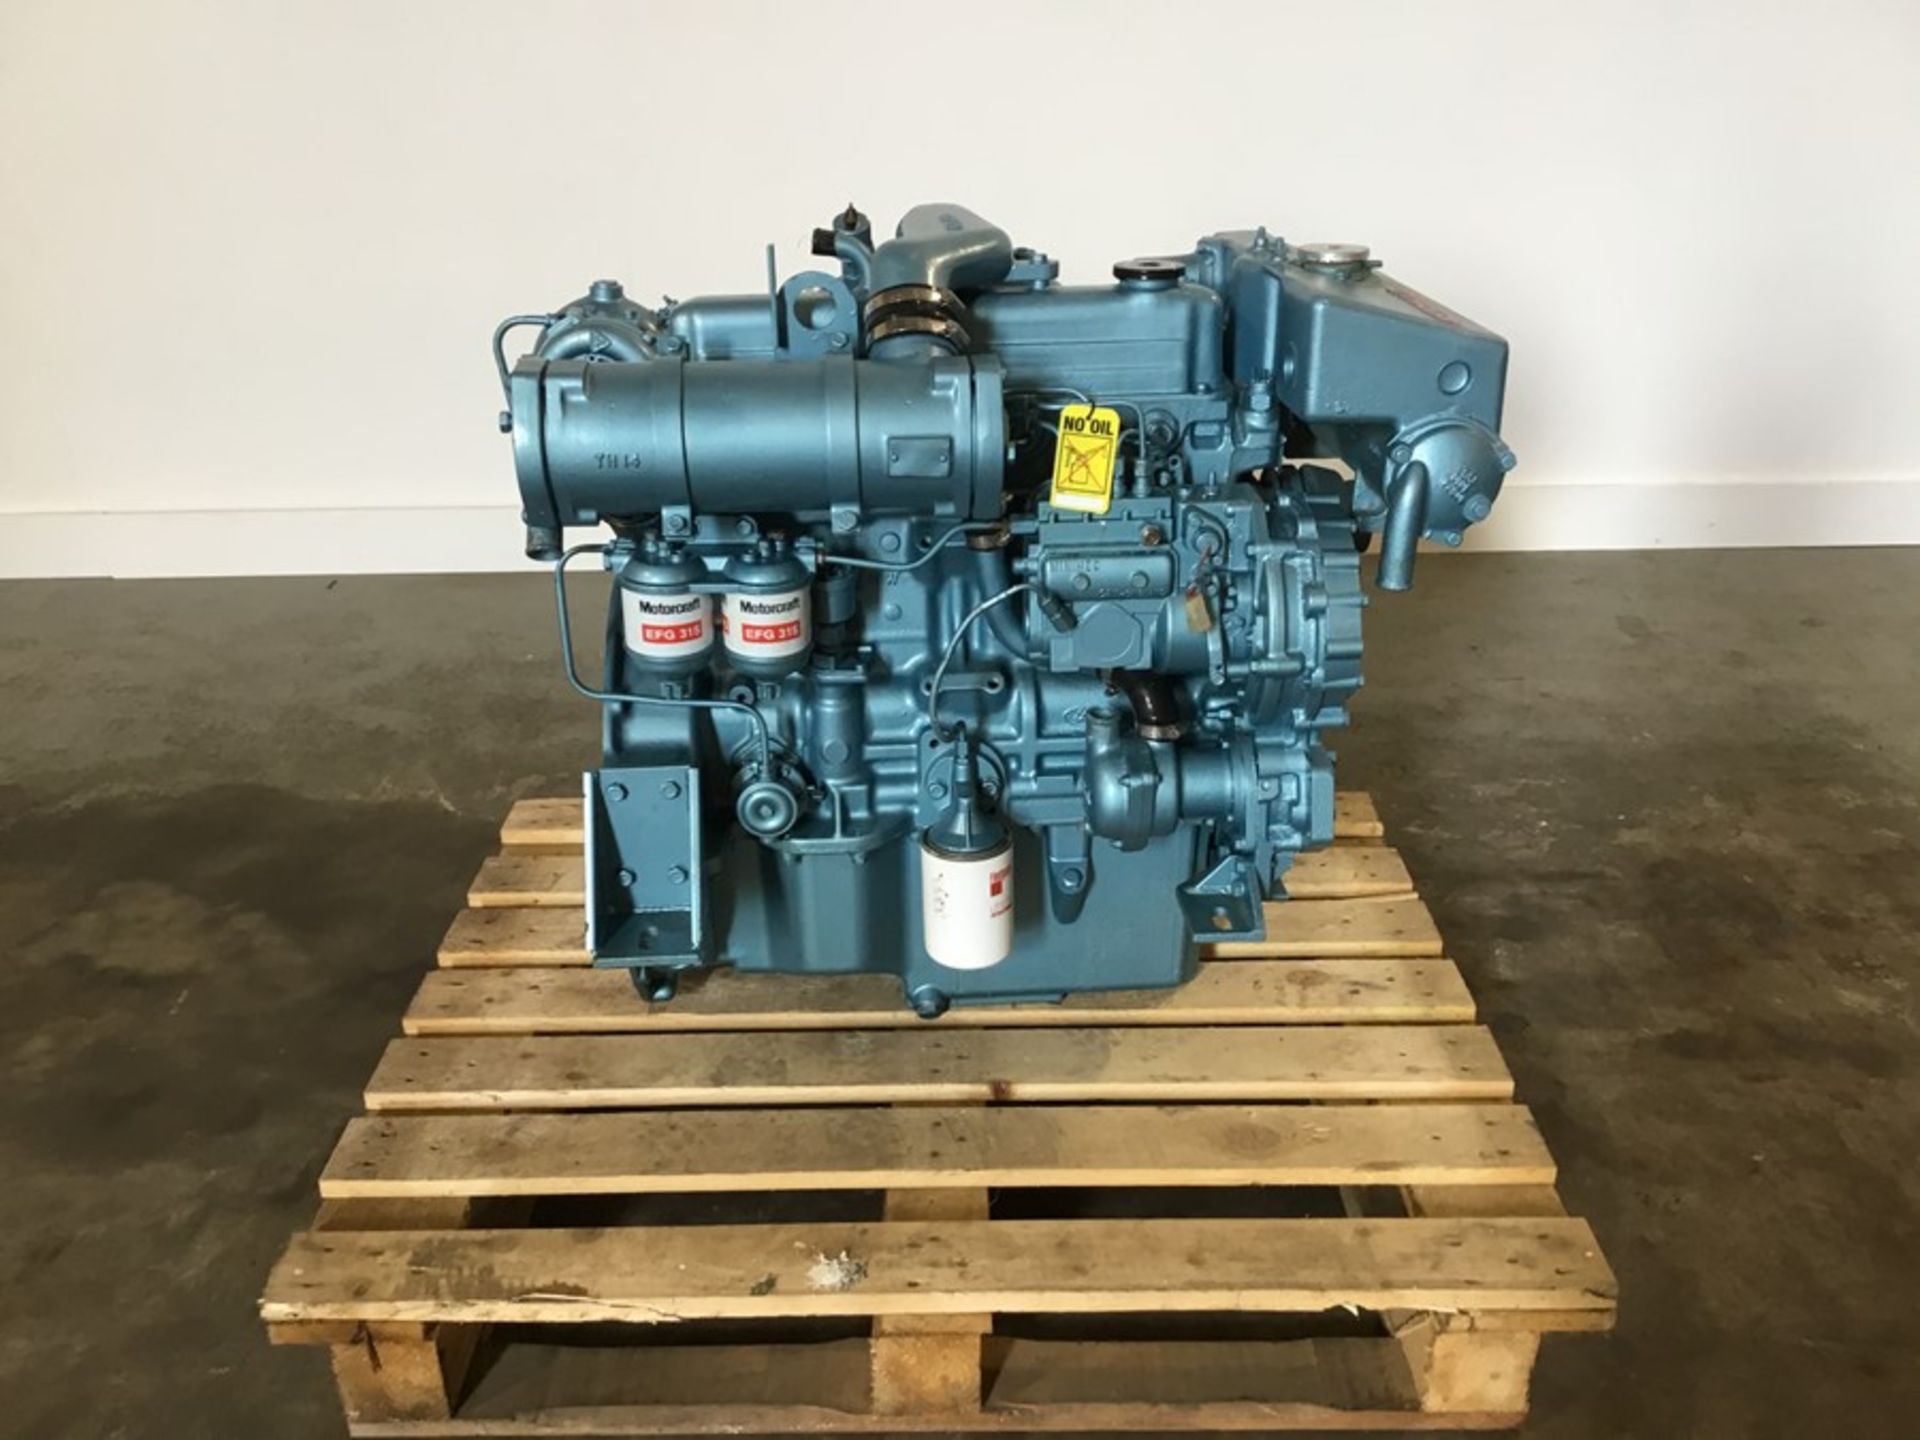 Ford 2722E Marine Diesel engine: Ford 2722e 4cyl Turbo 140Hp @2500Rpm used low hours - Image 13 of 18